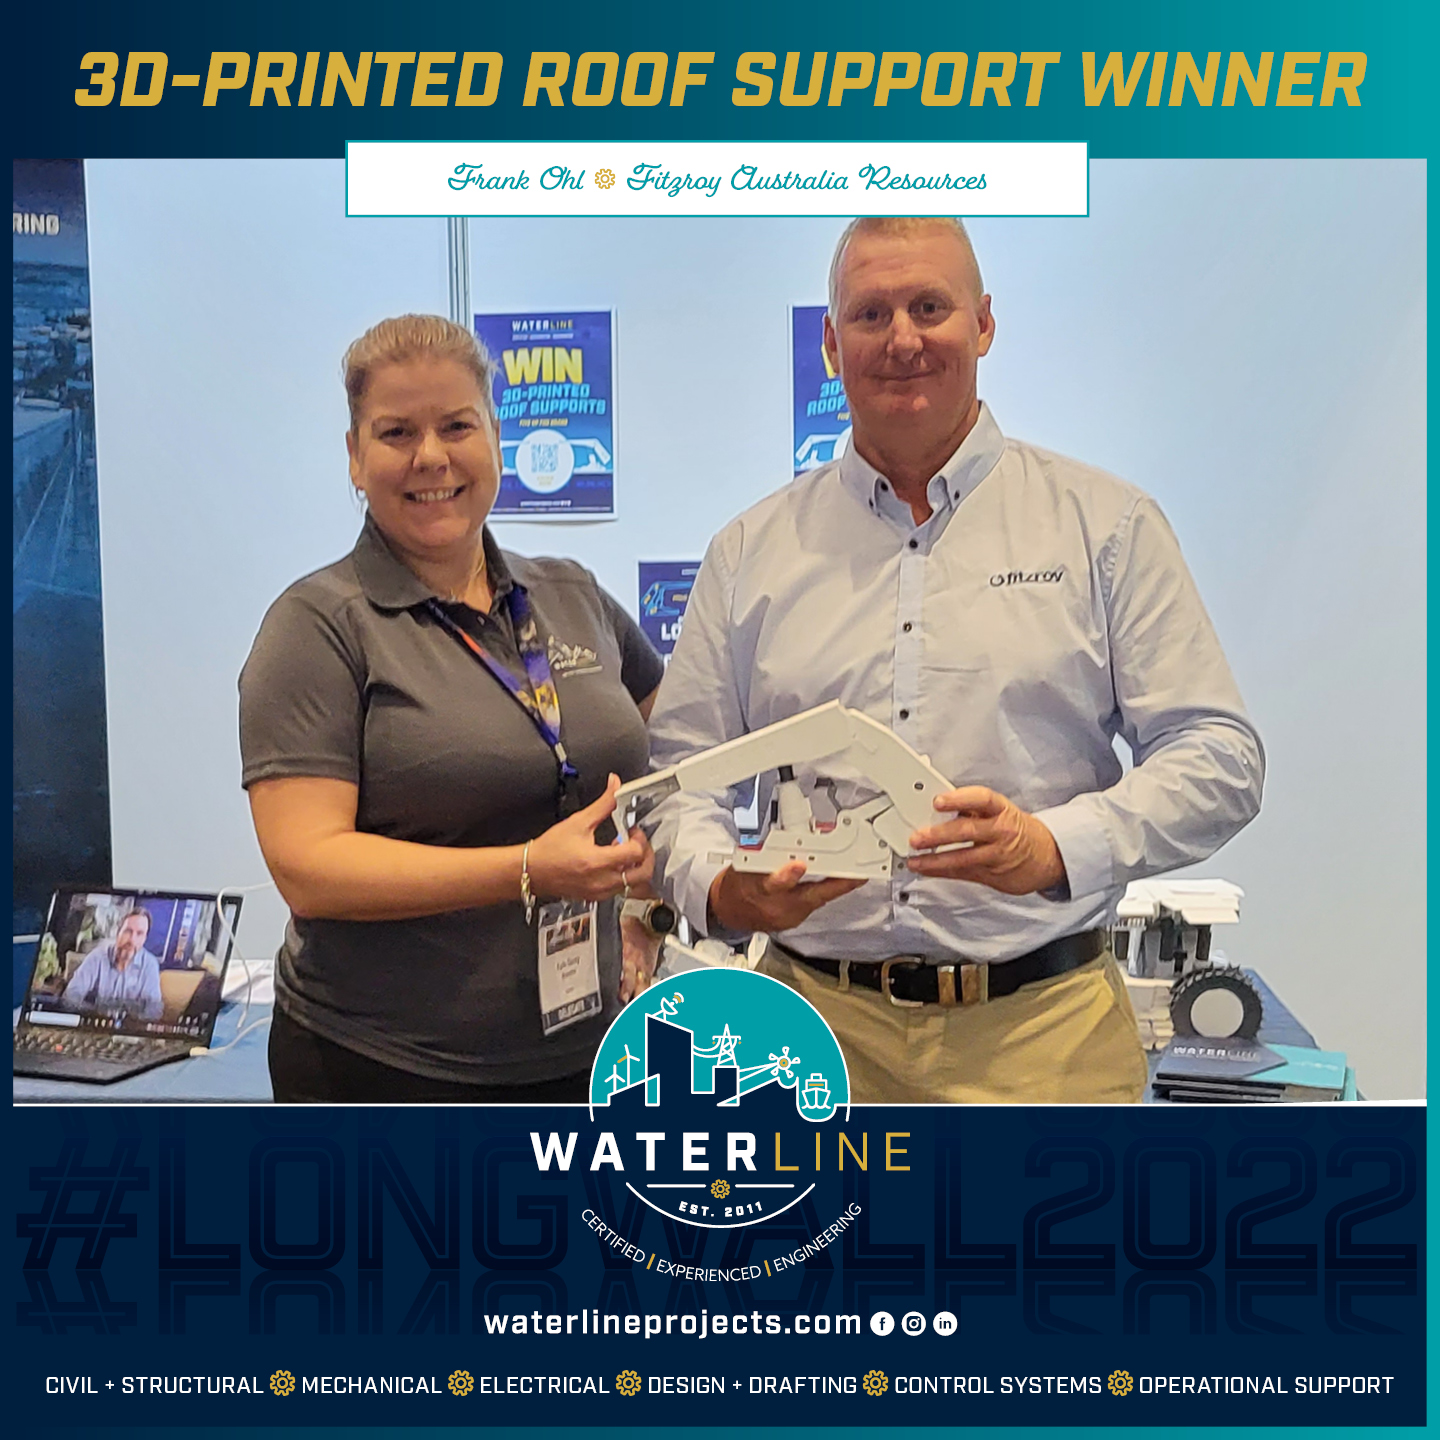 Waterline's Kylie Davey with Frank Ohl from , winner of one of our 3D-printed roof supports